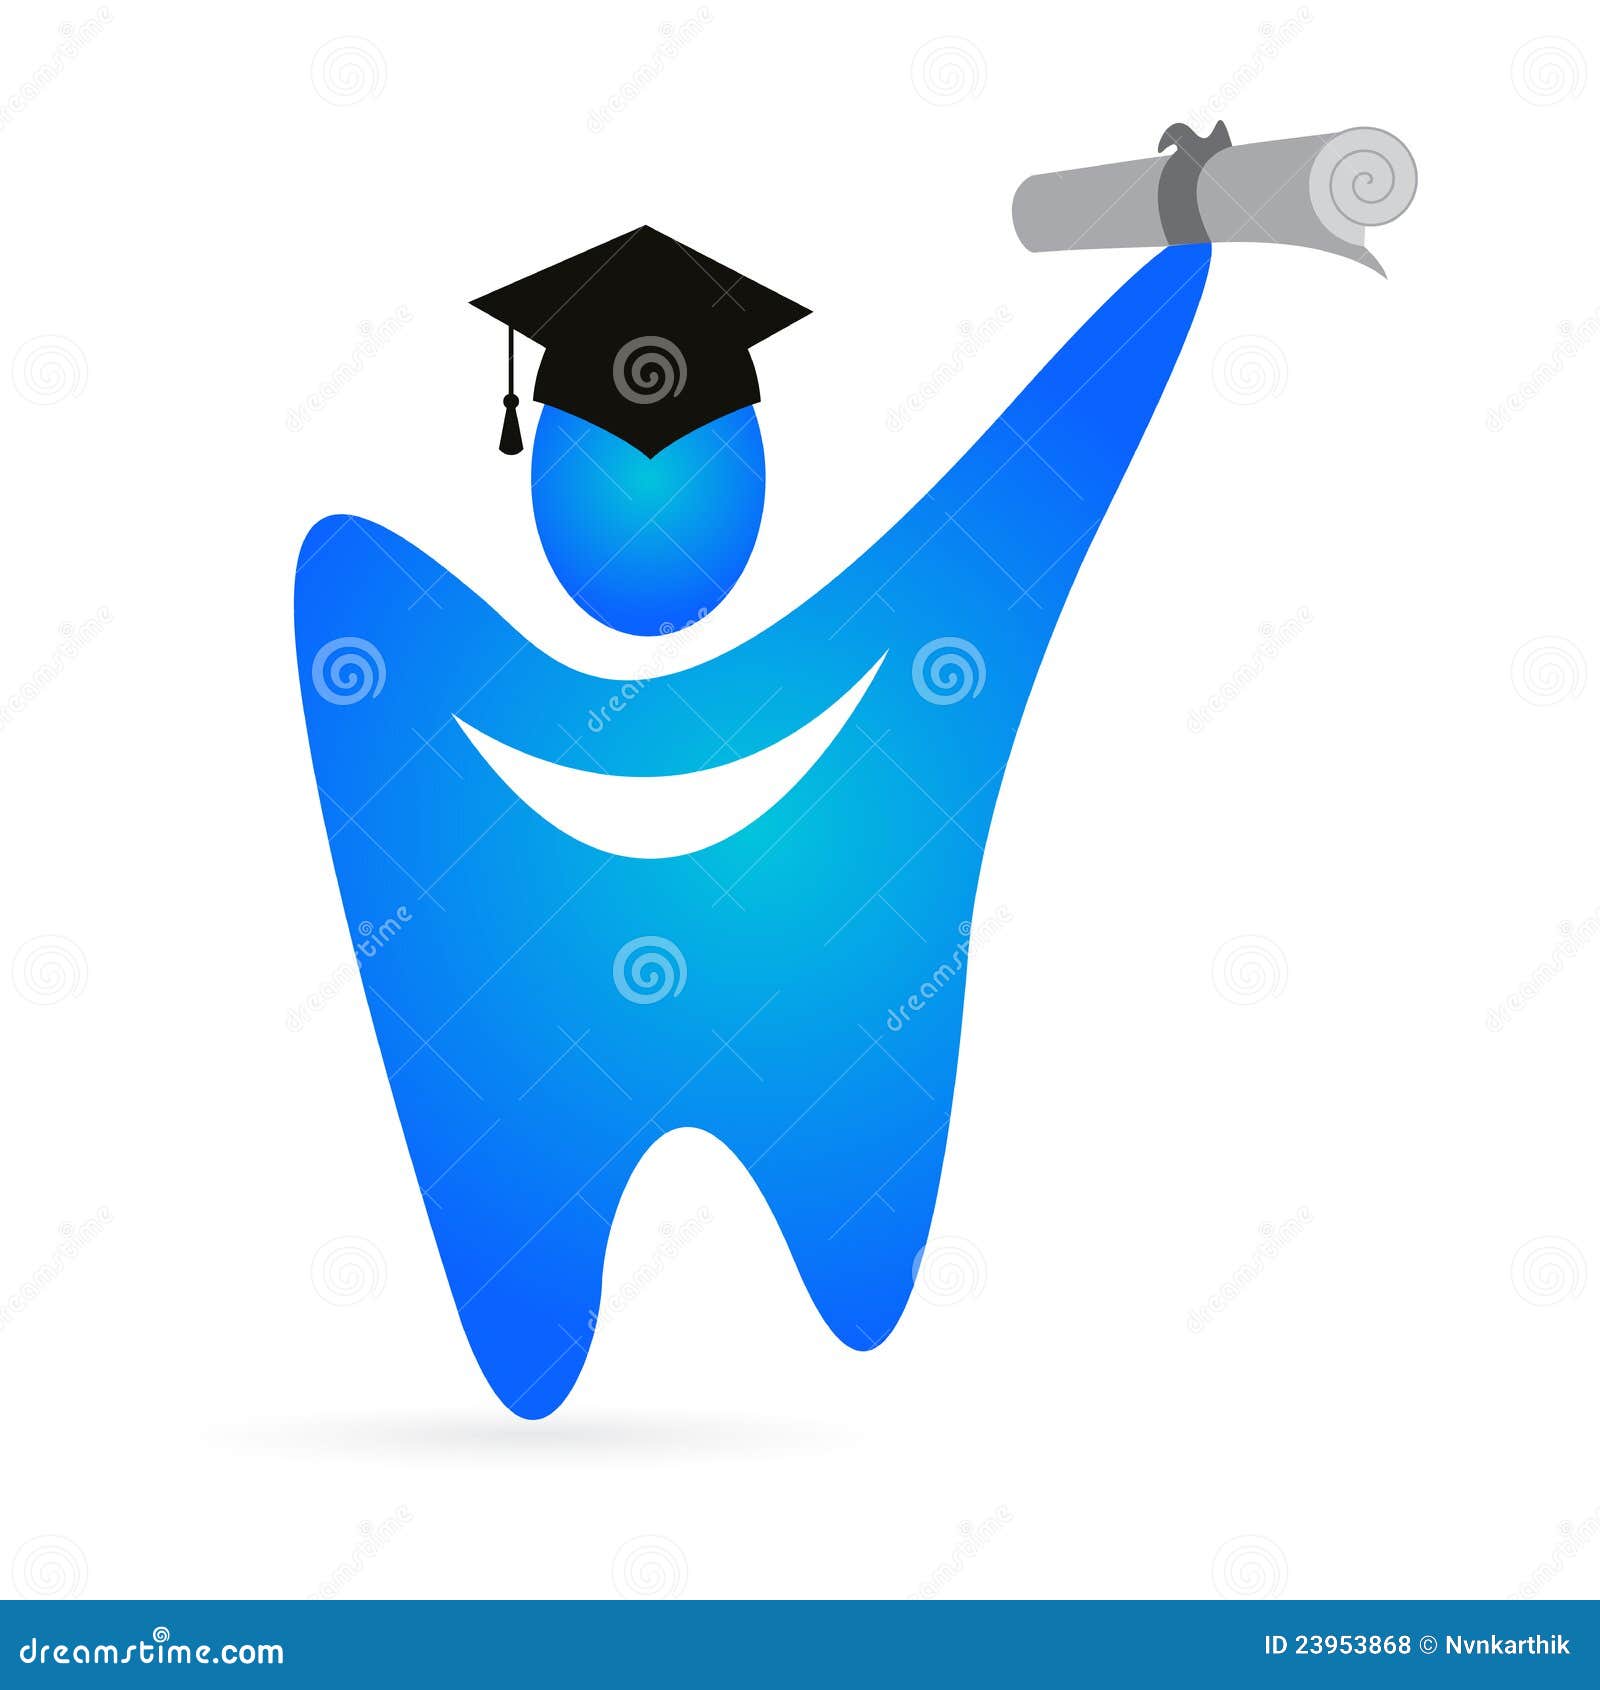 tooth crown clip art - photo #27